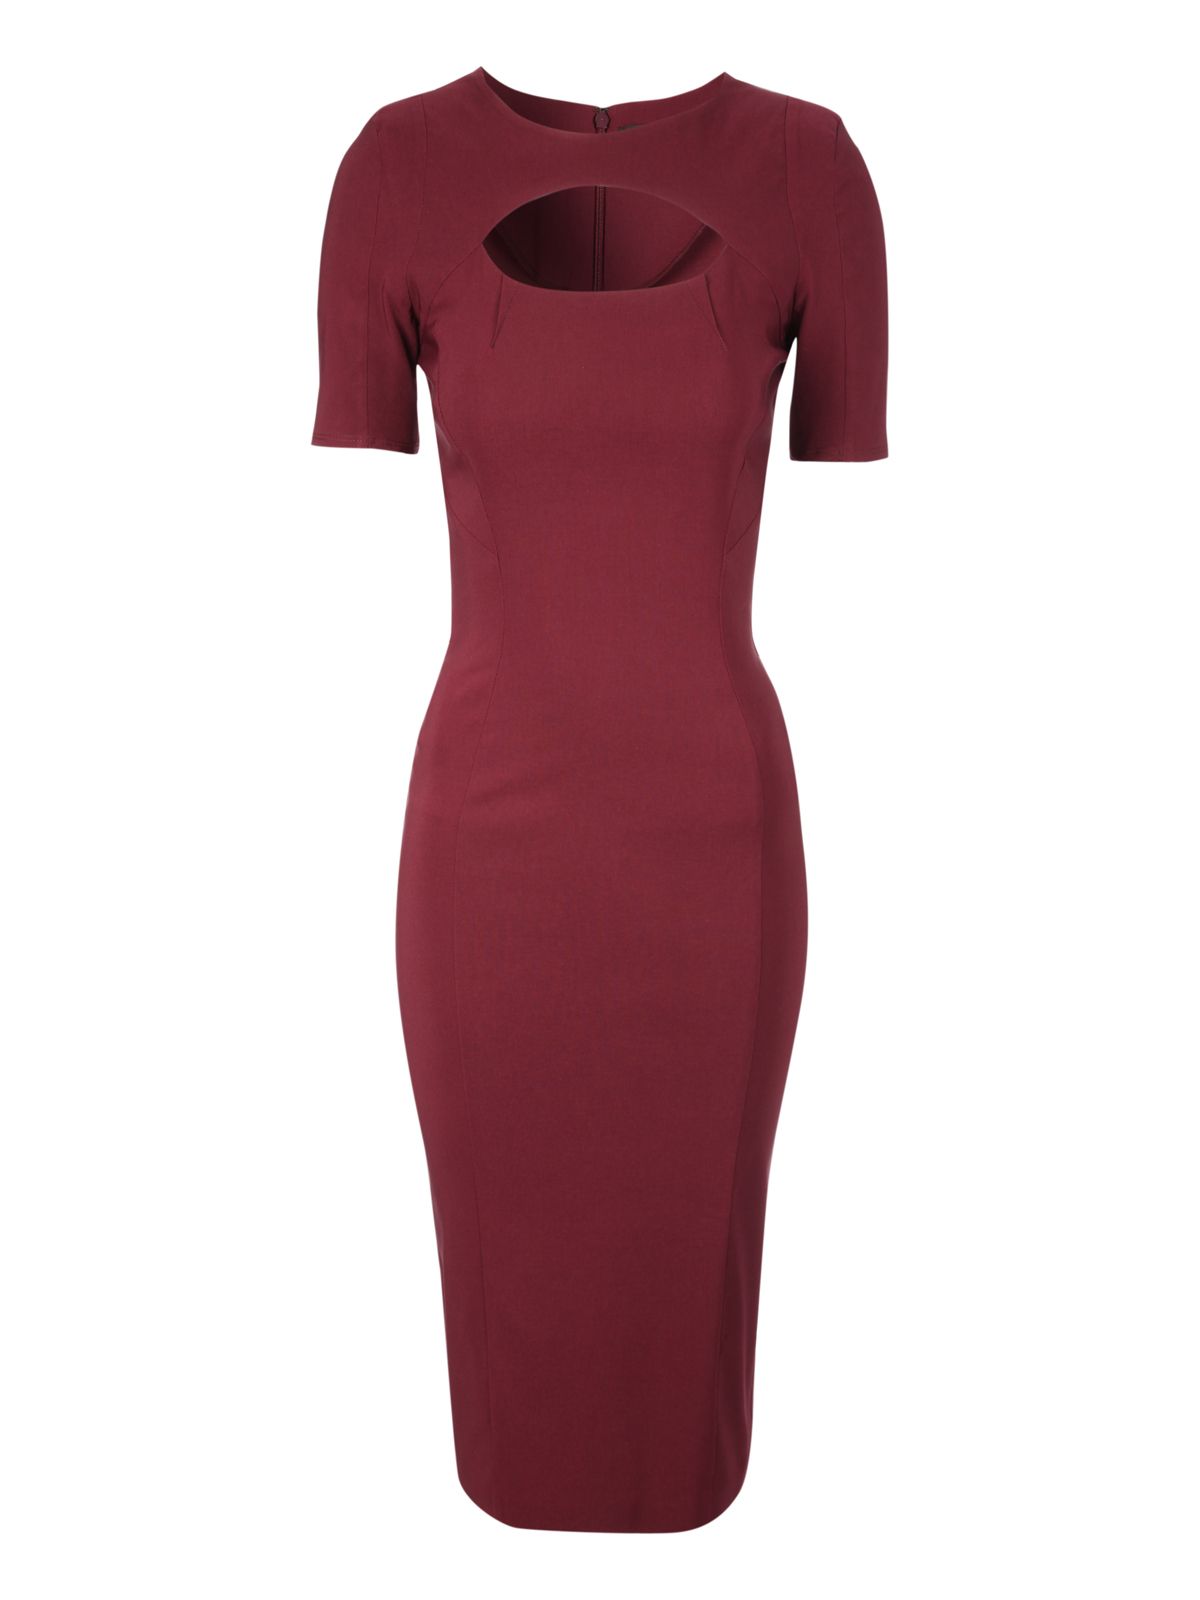 Jane Norman Cut Out Bodycon Dress in Red (Burgundy) | Lyst